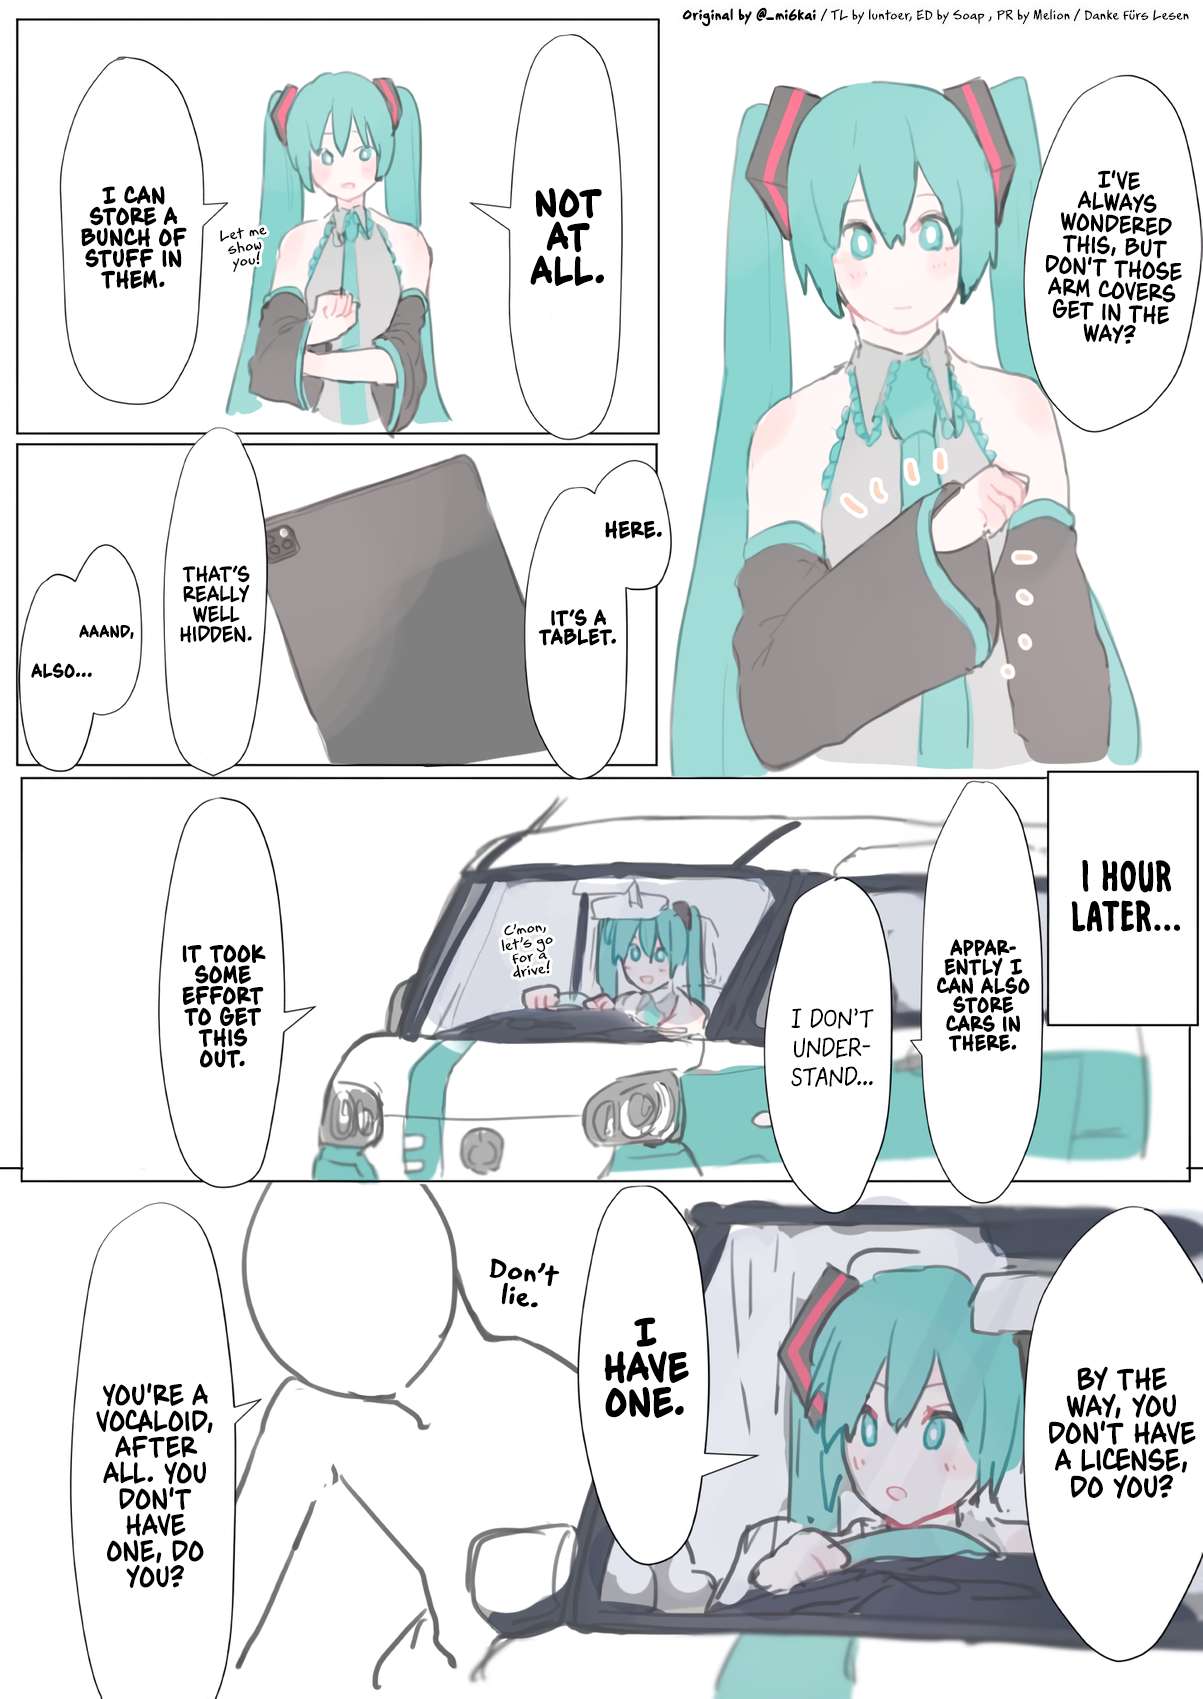 The Daily Life Of Master & Hatsune Miku - chapter 21 - #1